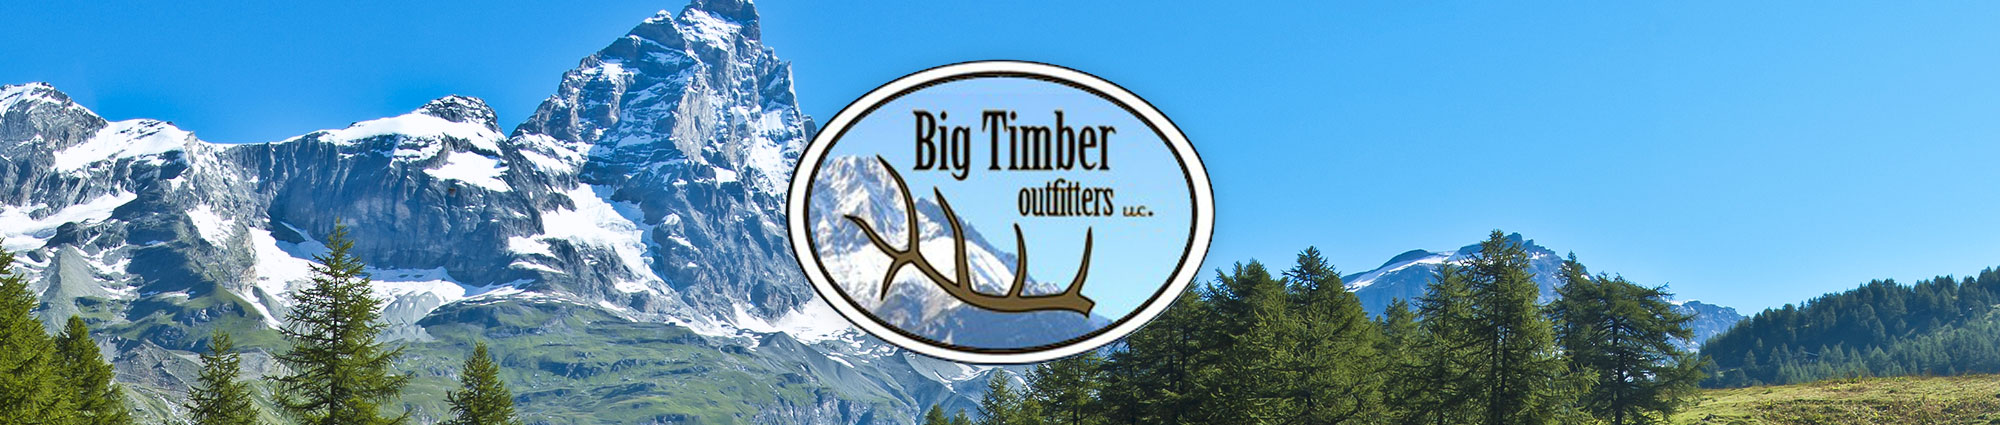 Big Timber Outfitters